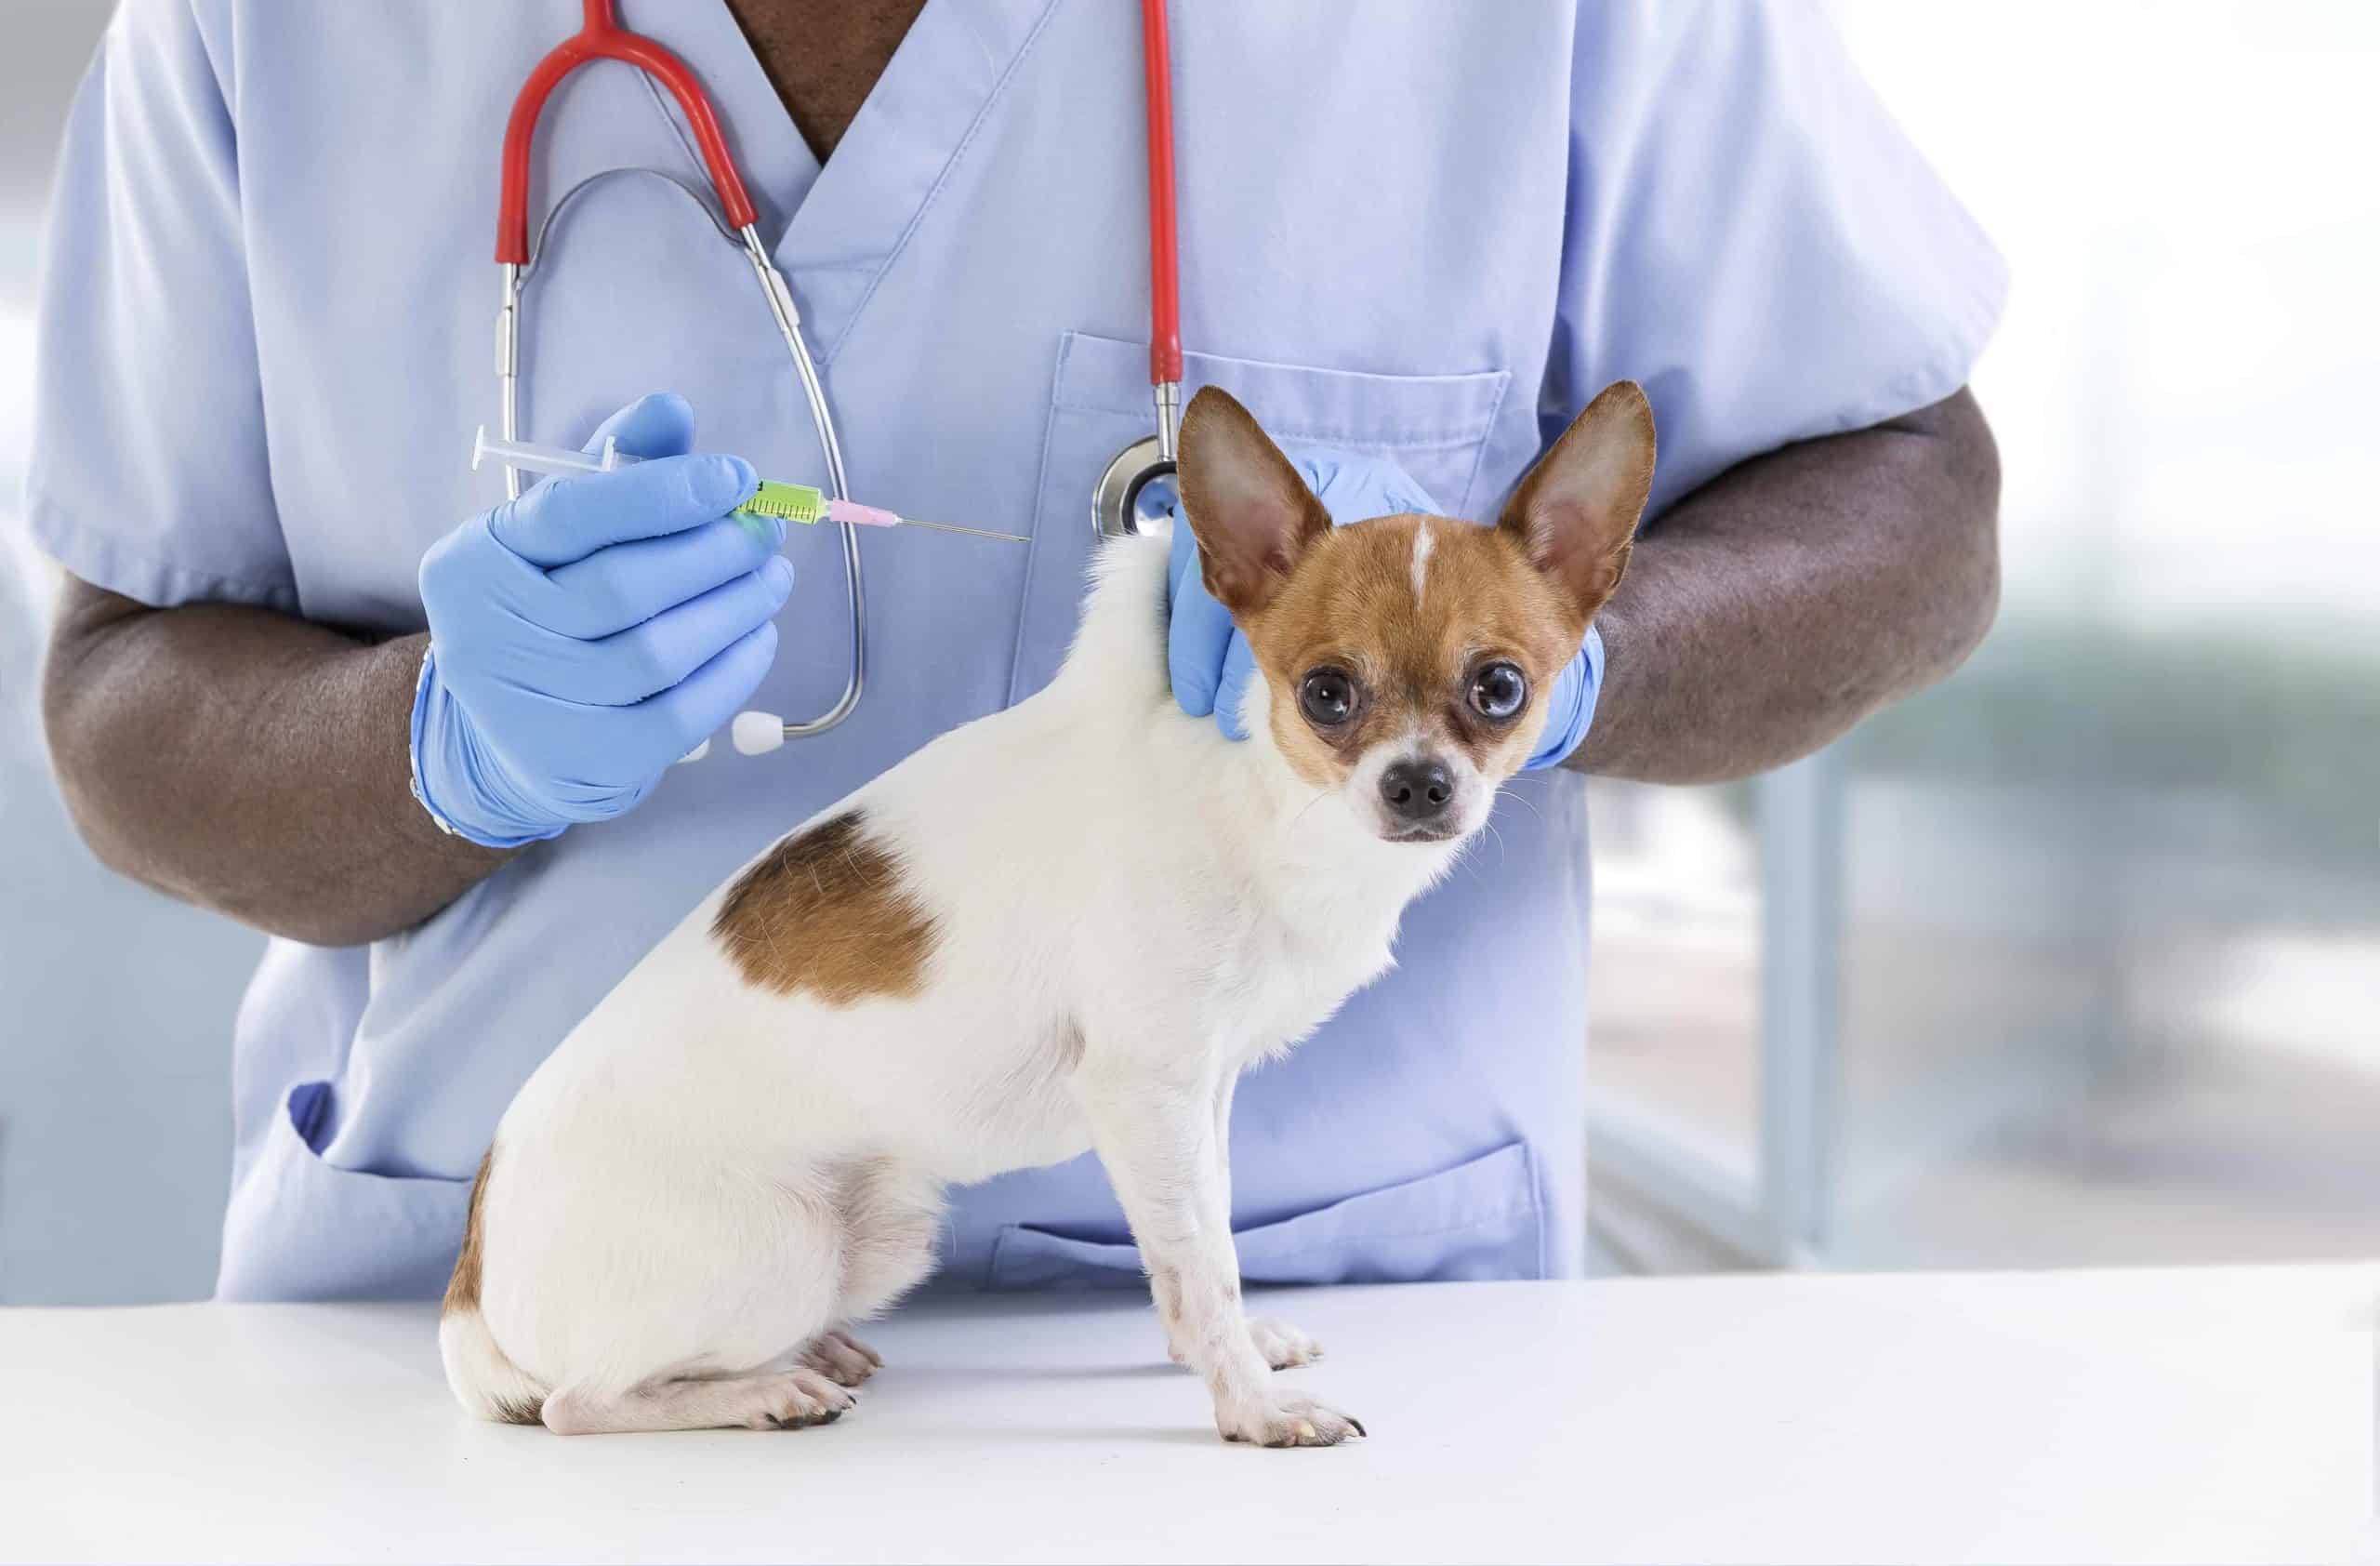 Vet gives Chihuahua a vaccine.